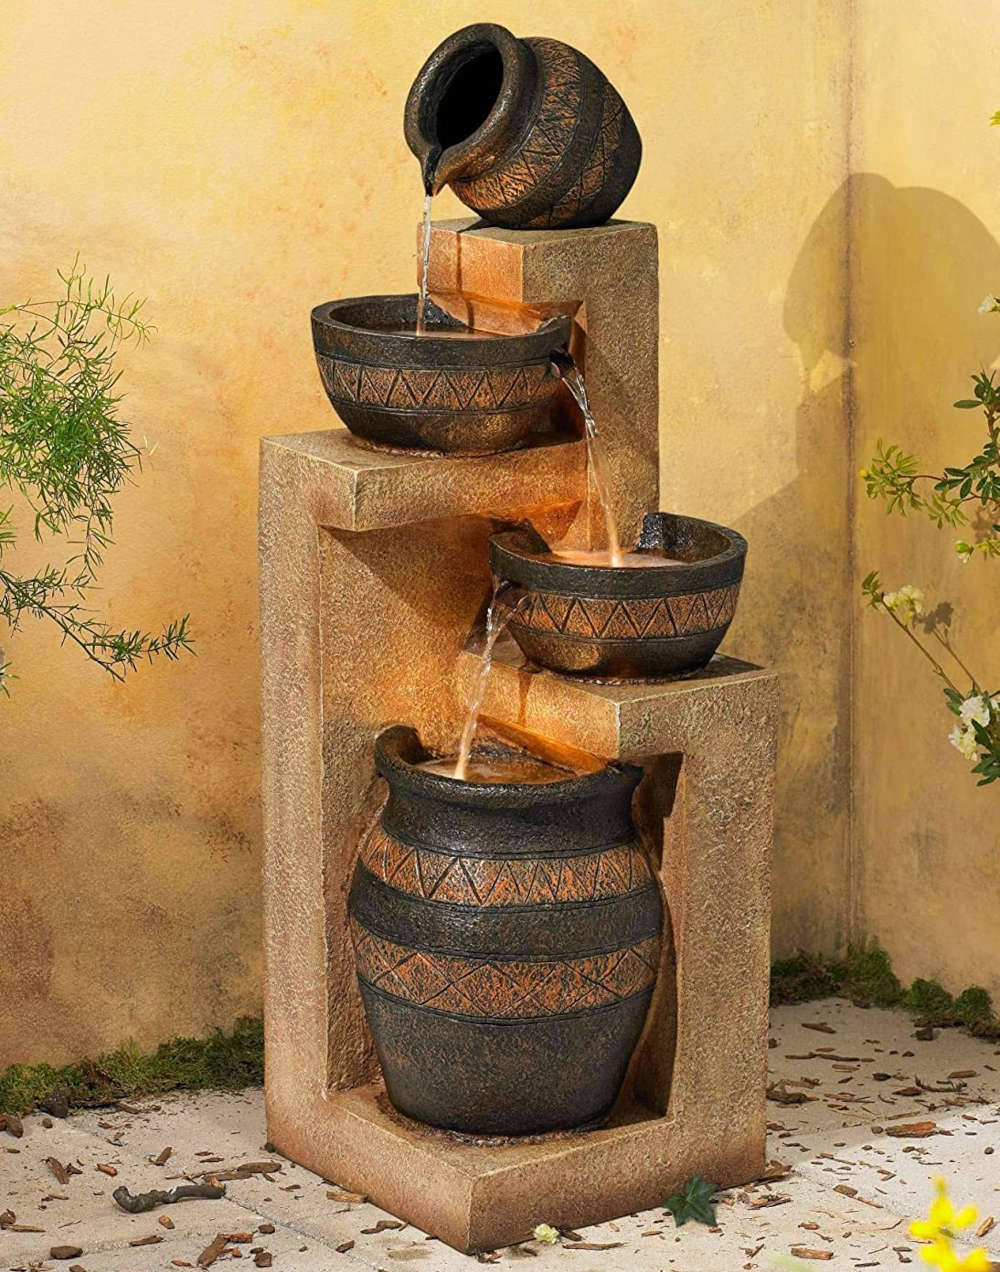 Bowl and Jar Outdoor urn fountains from Lamps Plus